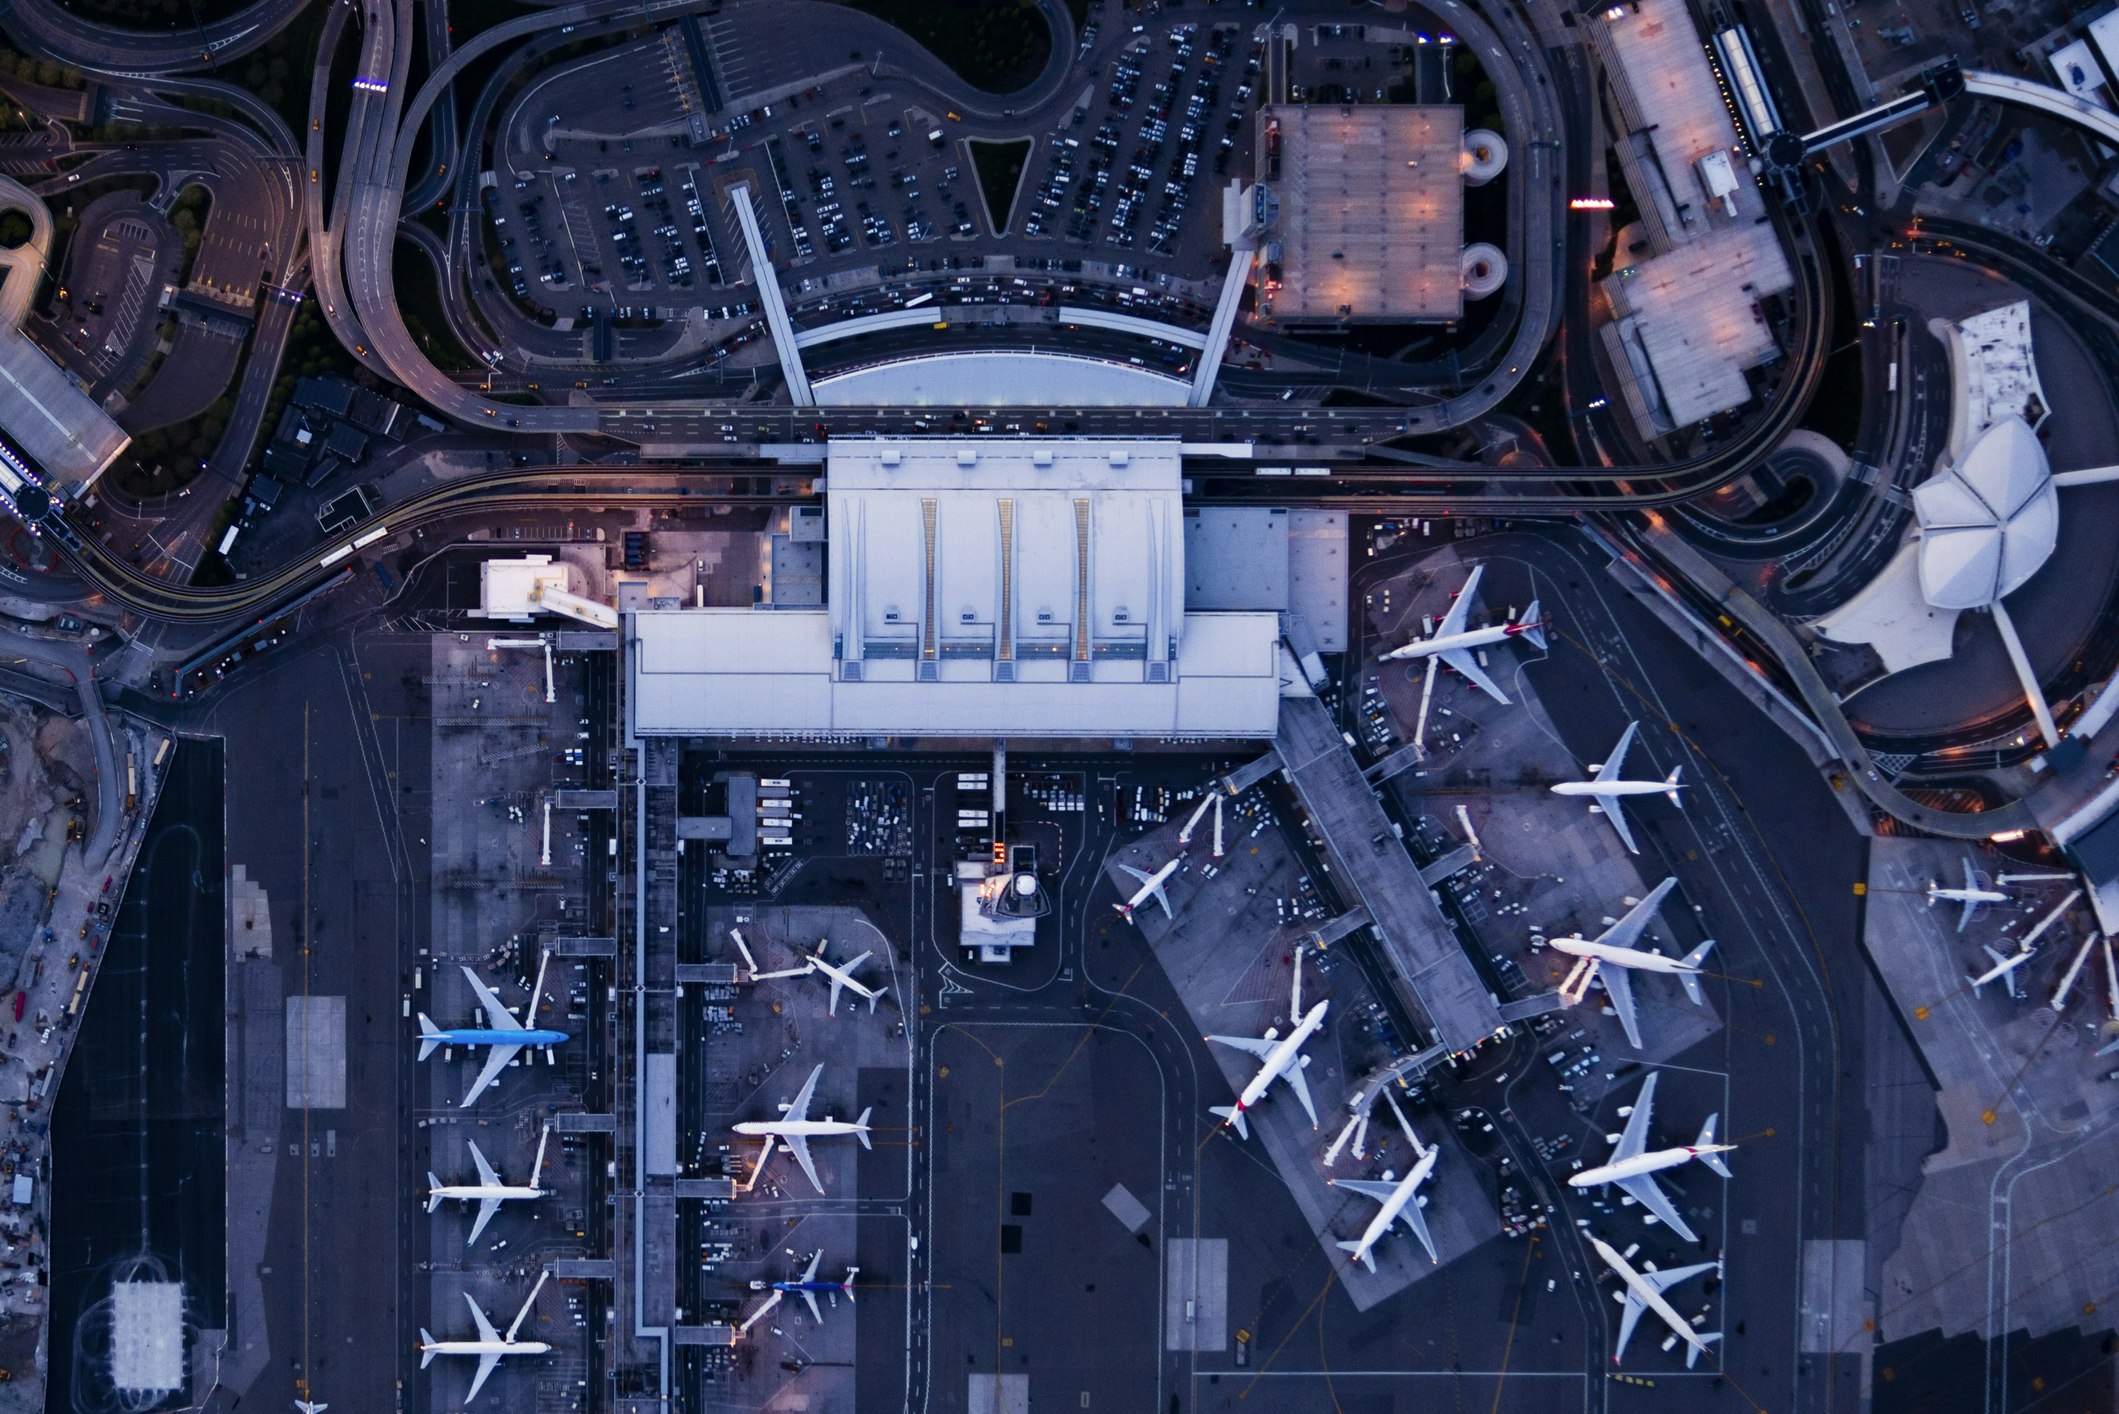 An aerial view in deep blue and dusty lavender tones of JFK airport in New York at night, with the white terminal in the upper center and white airplanes parked on the ground all around.jpg